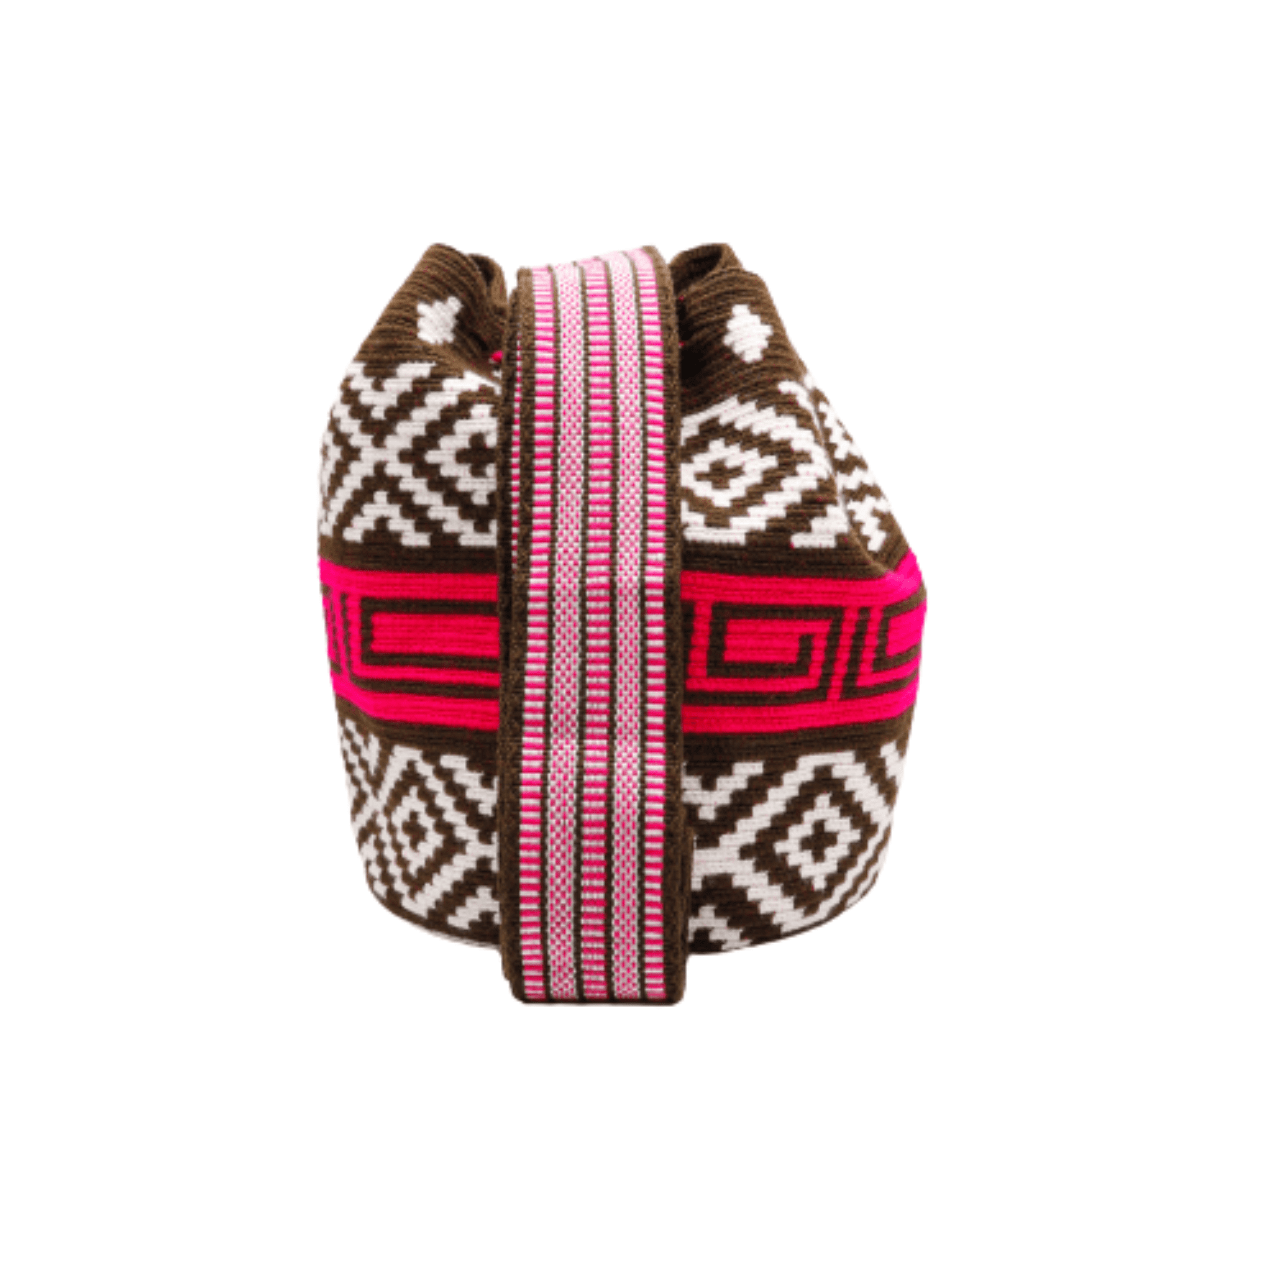  Nana Wayuu Bag, meticulously handmade by a skilled Wayuu artisan. The bag showcases a unique design in shades of white, coffee, and magenta, transforming it into a mesmerizing piece of art.